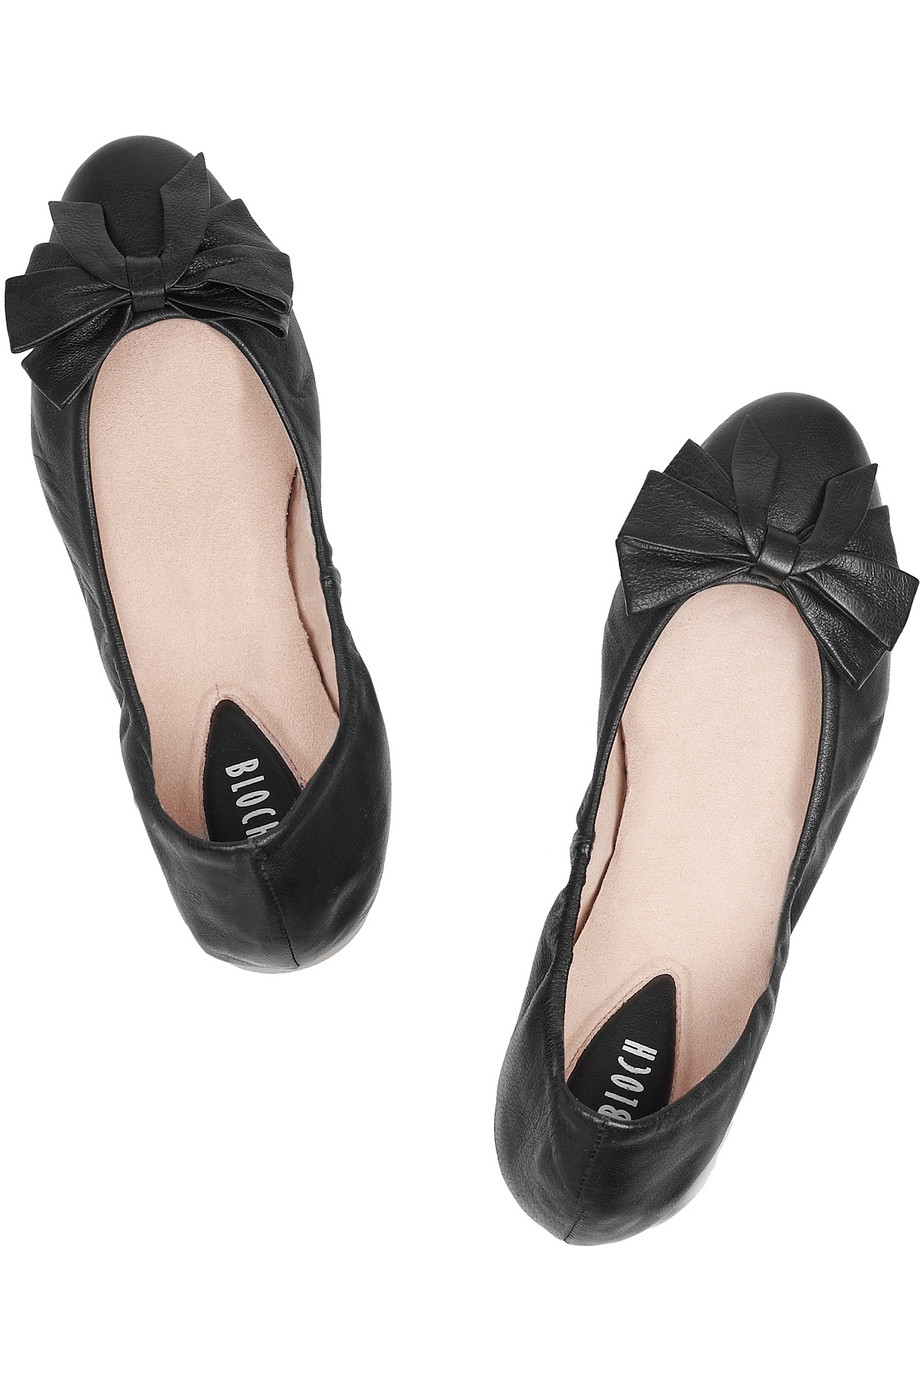 Bloch Ayva Bow-front Leather Ballet Flats in Black - Lyst